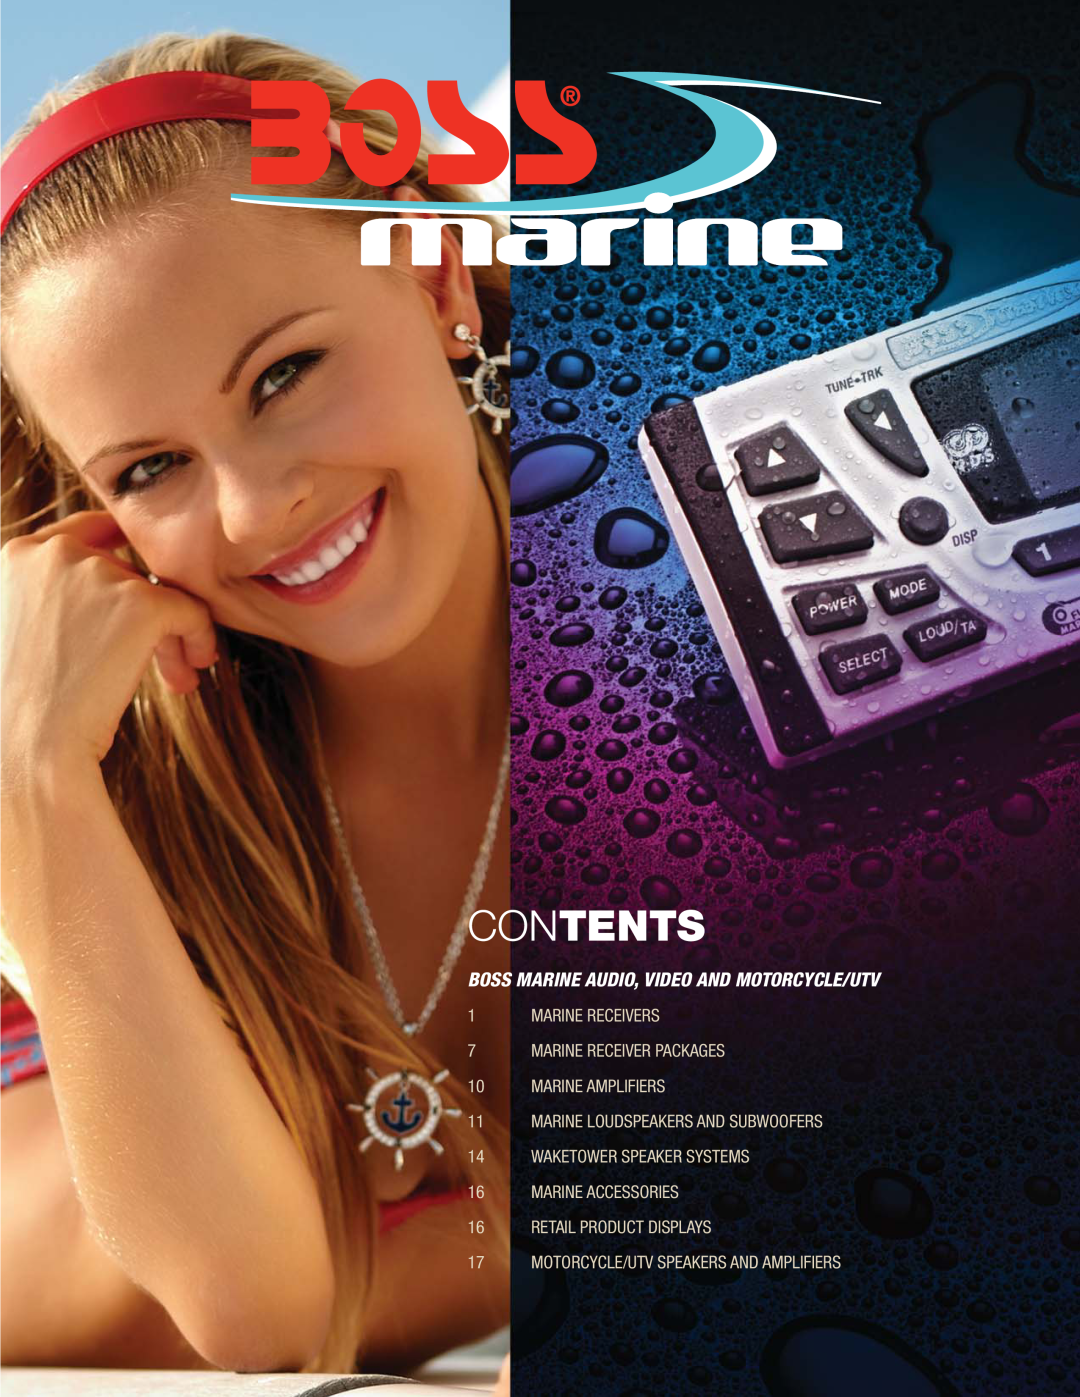 Boss Audio Systems MR2080W, MR1620W, MR1640W Contents, Boss Marine Audio, Video And Motorcycle/Utv, 10MARINE AMPLIFIERS 